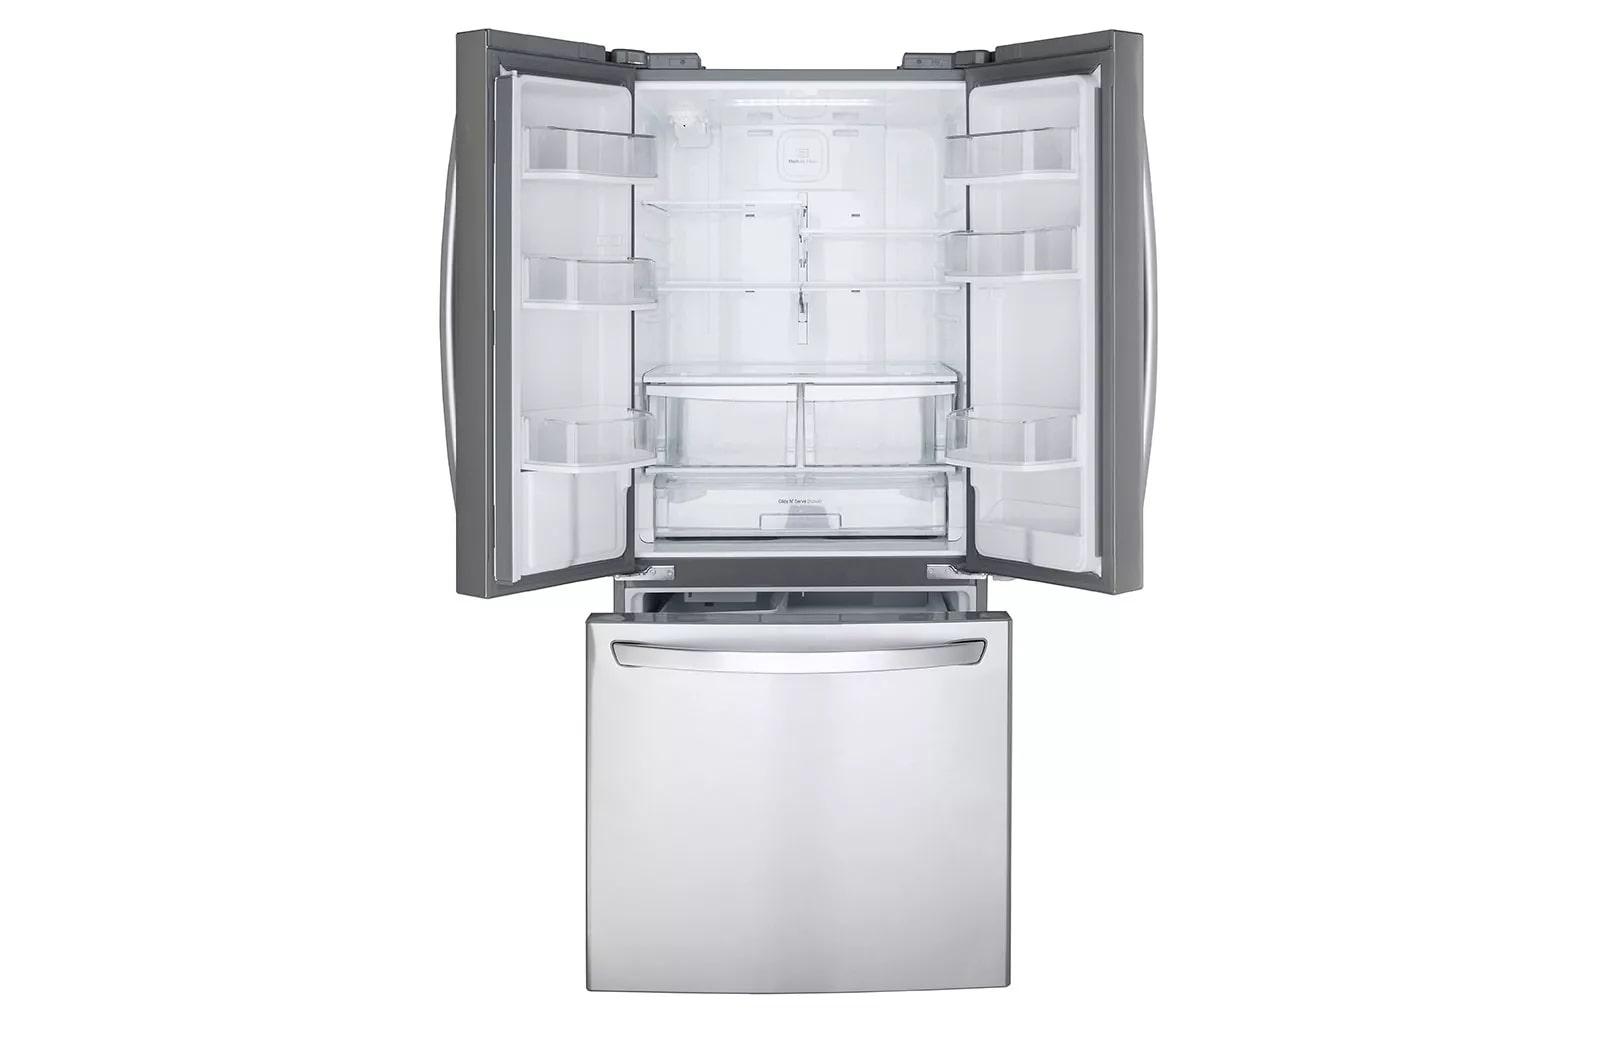 LG LFDS22520S 22 Cu. Ft. Stainless French Door Refrigerator - image 3 of 5